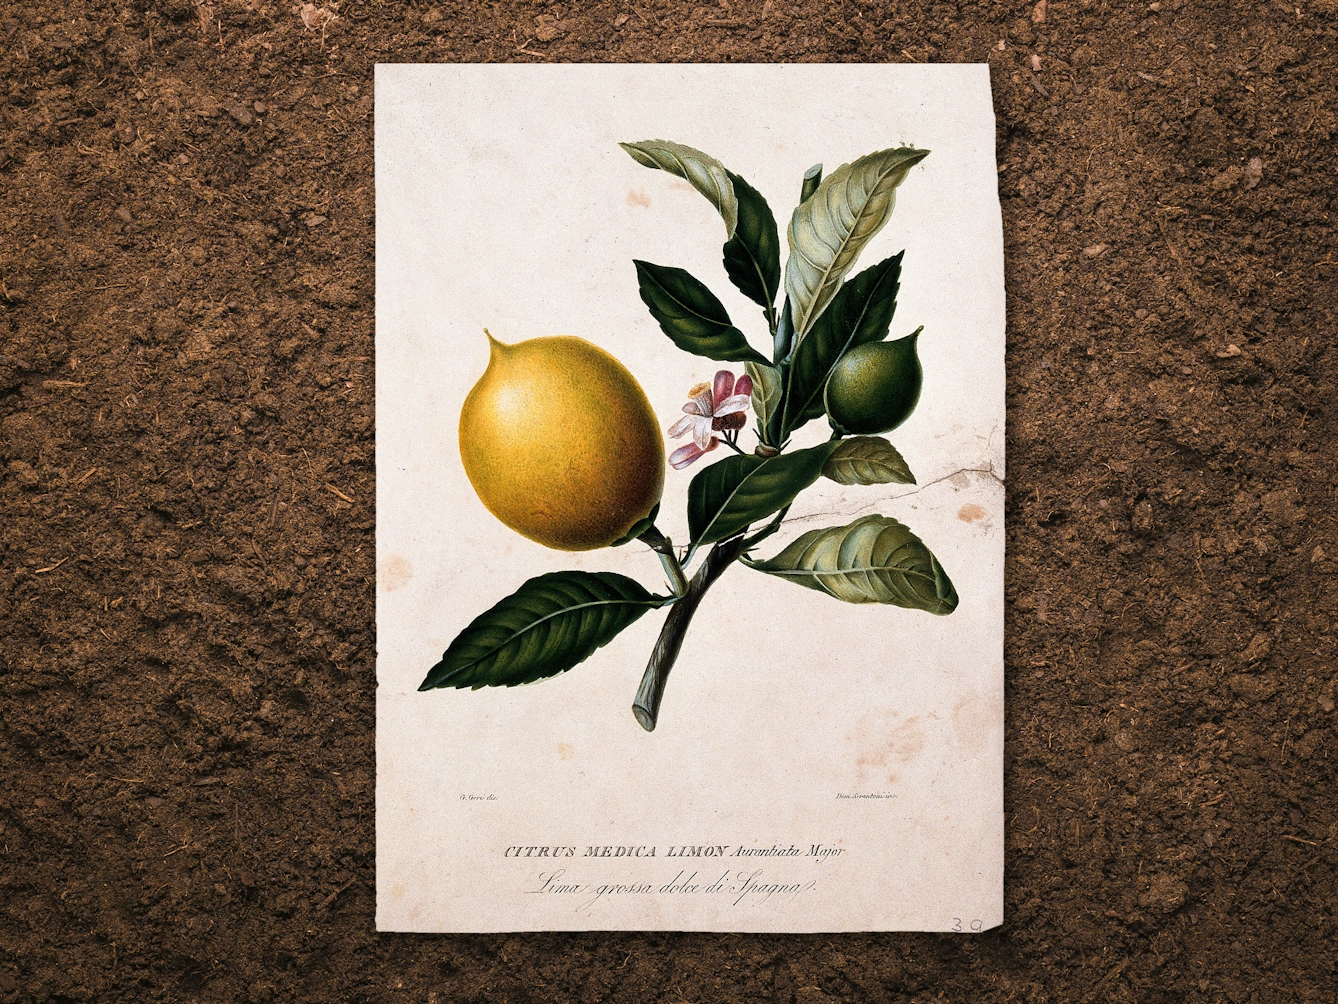 Digital composite image of a botanical drawing resting slightly above a brown earth background, casting a subtle shadow. The drawing shows the flowering fruit and stems of a lemon plant. The colours are greens, whites and yellows.